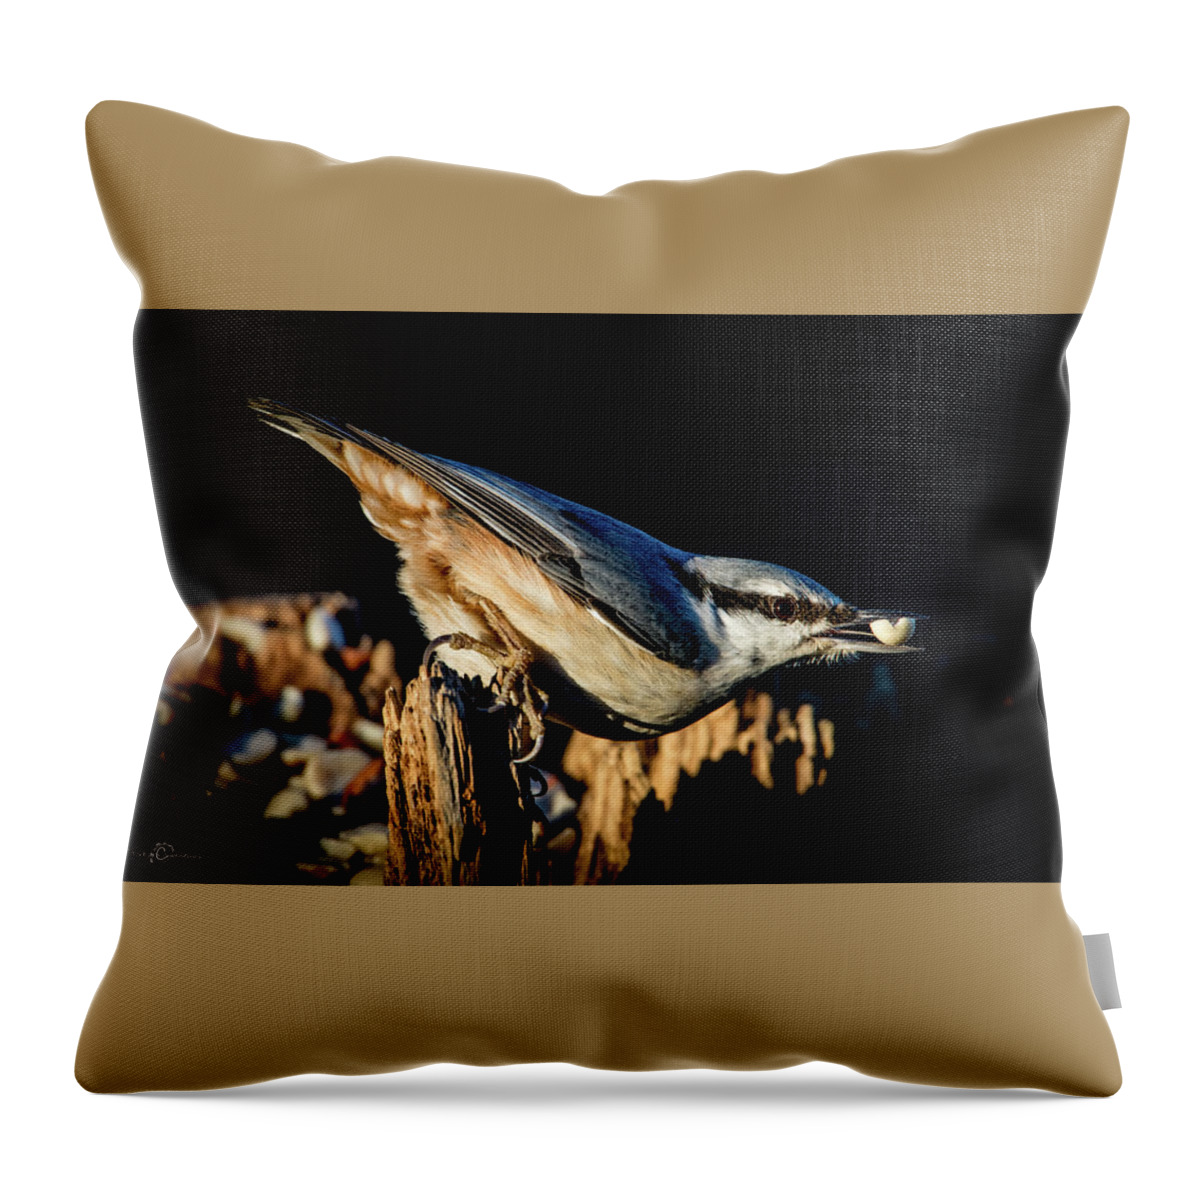 Nuthatch's Nut Throw Pillow featuring the photograph Nuthatch with a nut in the beak by Torbjorn Swenelius